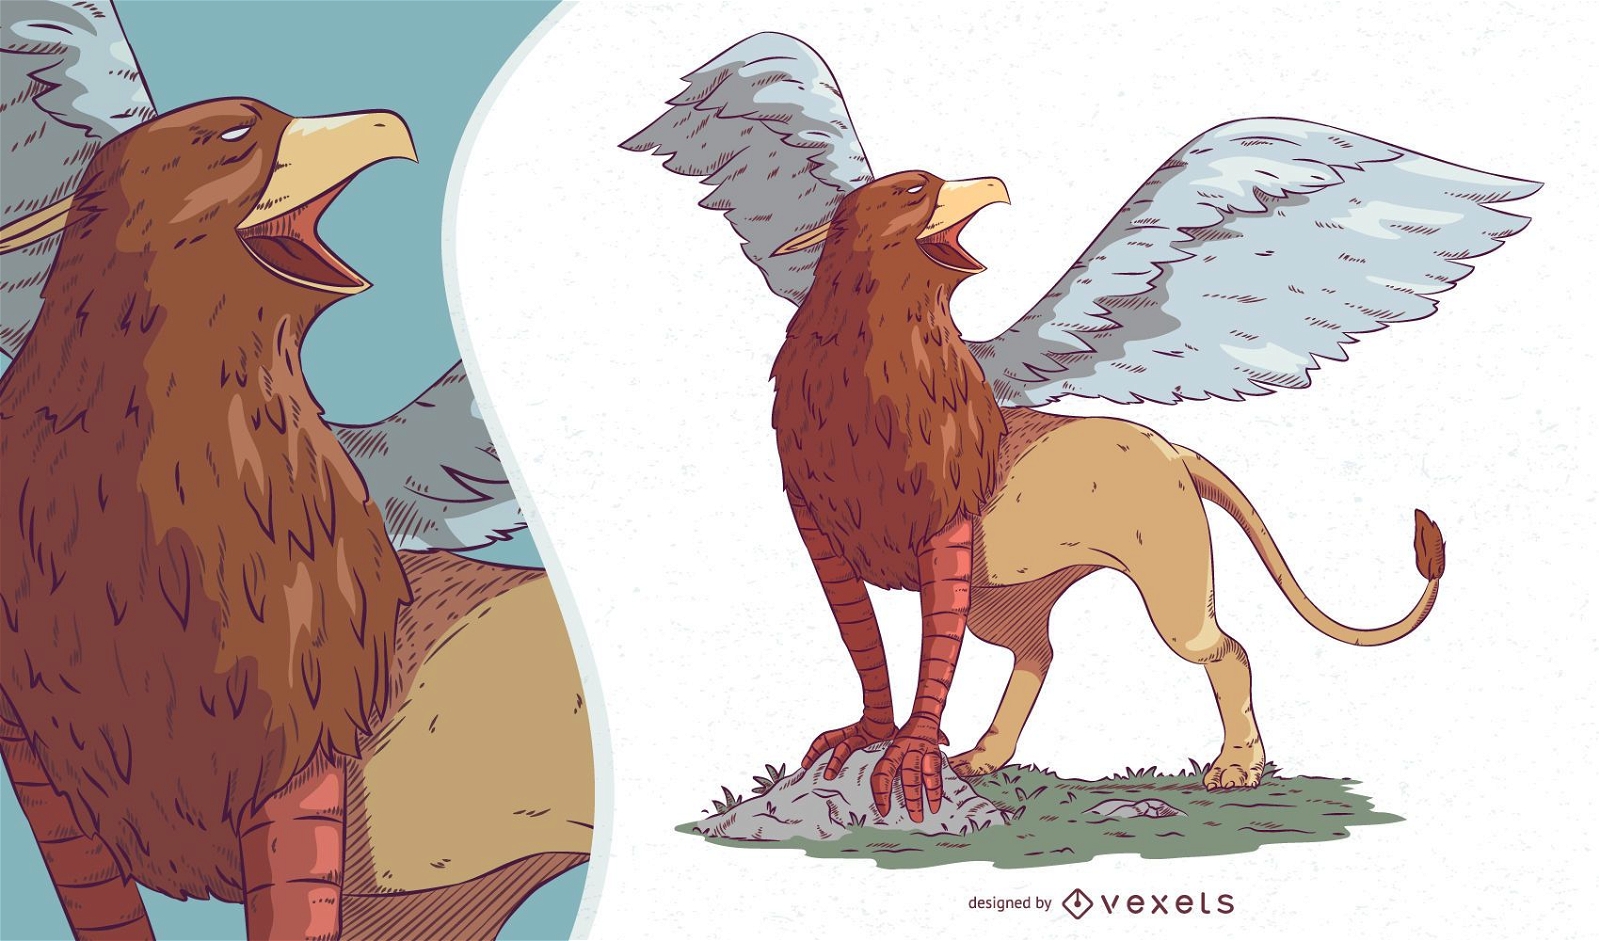 Griffin Mythical Creature Illustration